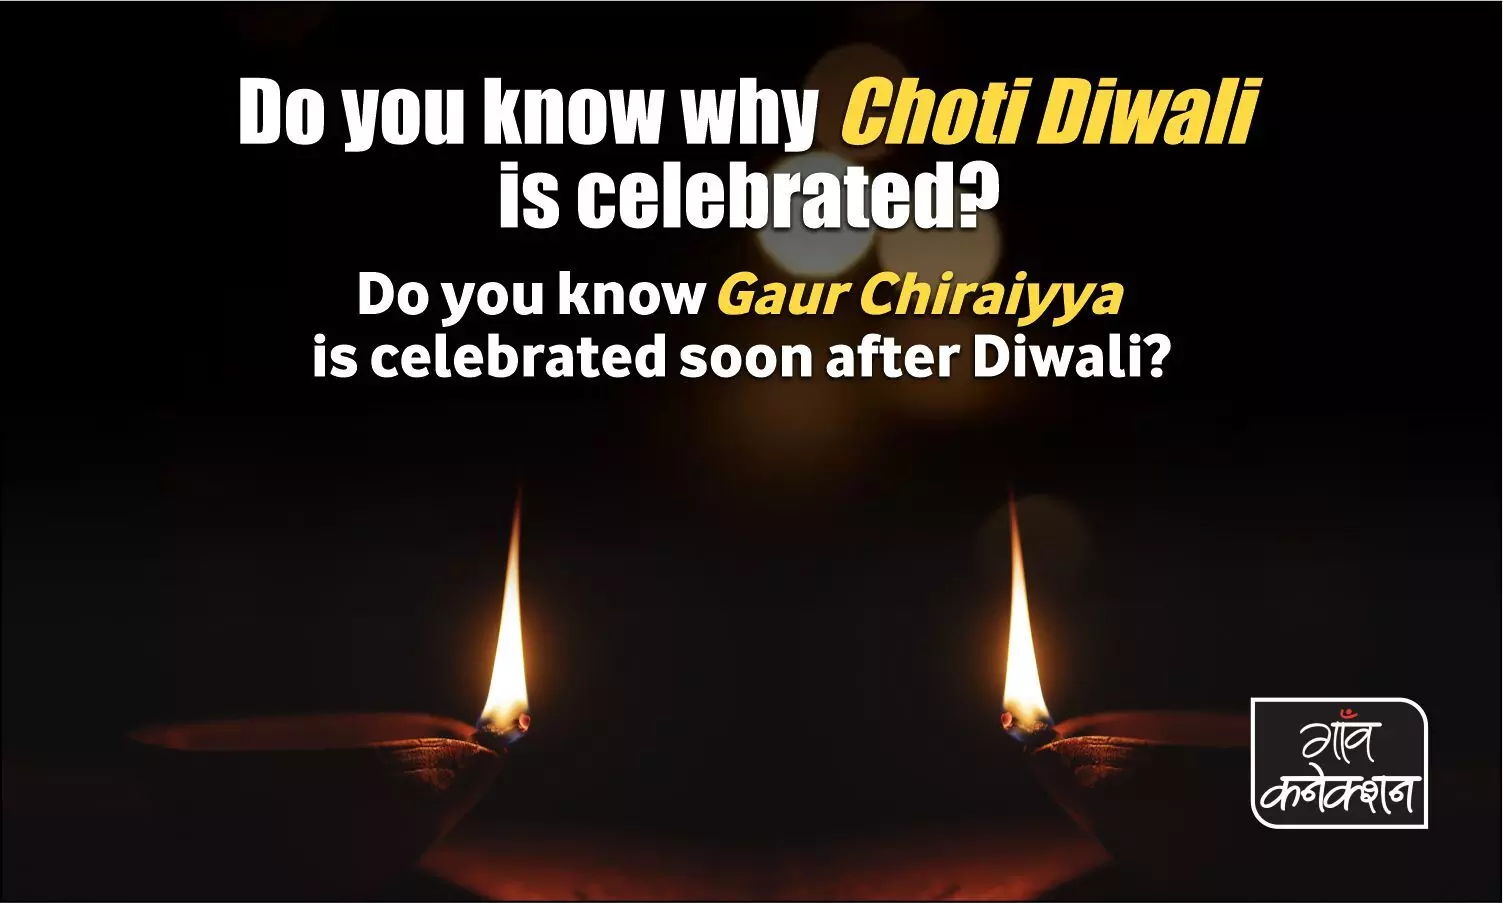 Each region celebrates Diwali differently, but the essence is to beat the darkness within